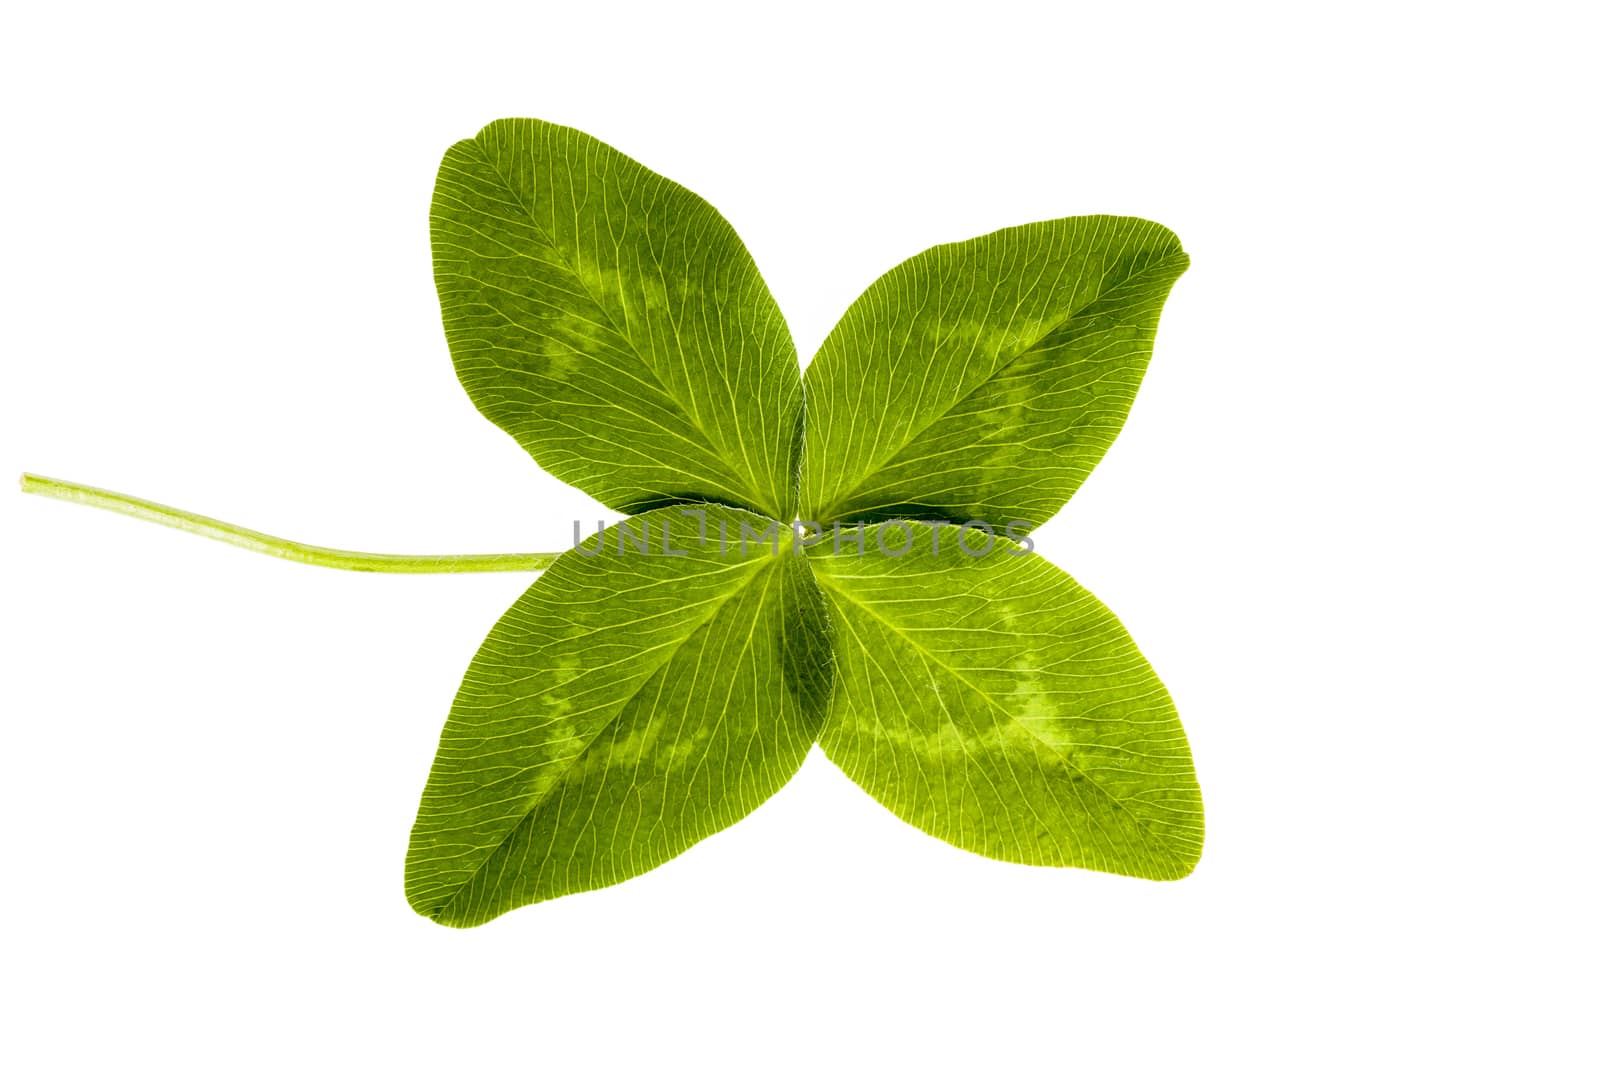 Four-leaf clover isolated on white background by mychadre77